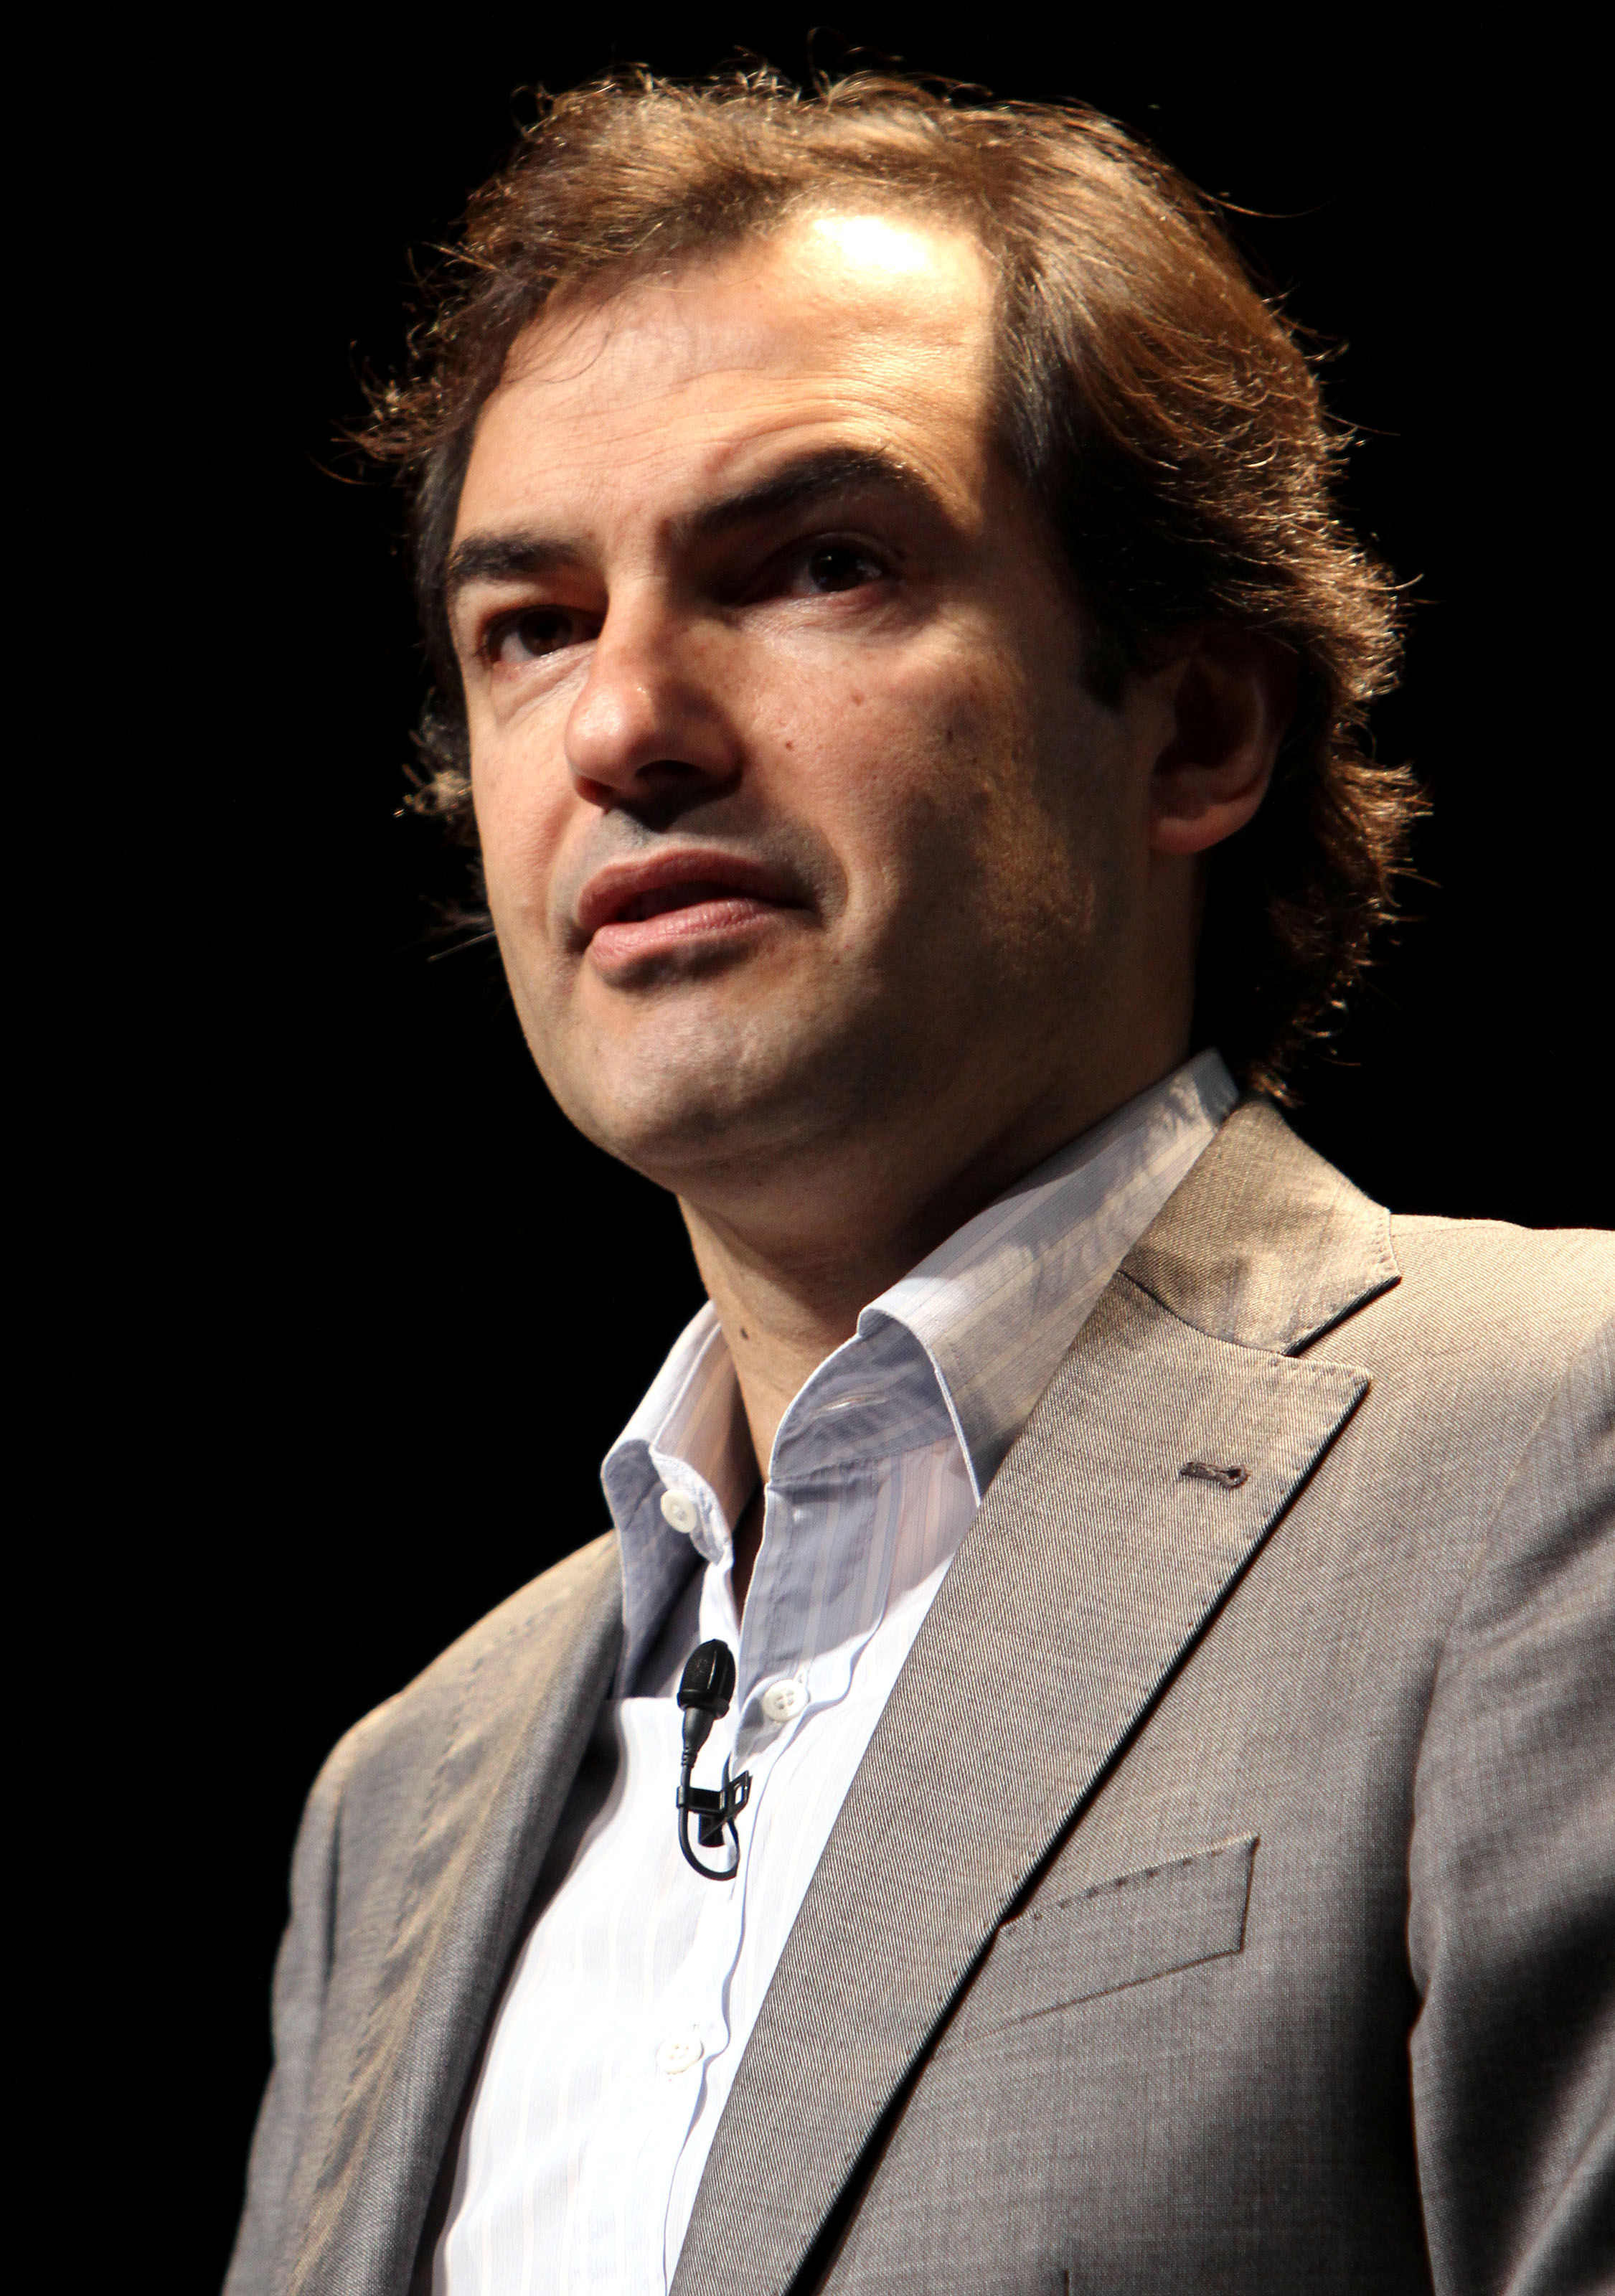 Henrique De Castro, former Vice President Global Media and Platforms of Google, delivers a speech during a session at the Cannes Lions 2010 International Advertising Festival in Cannes, on  June 23, 2010. (Sebastien Nogier—Reuters)